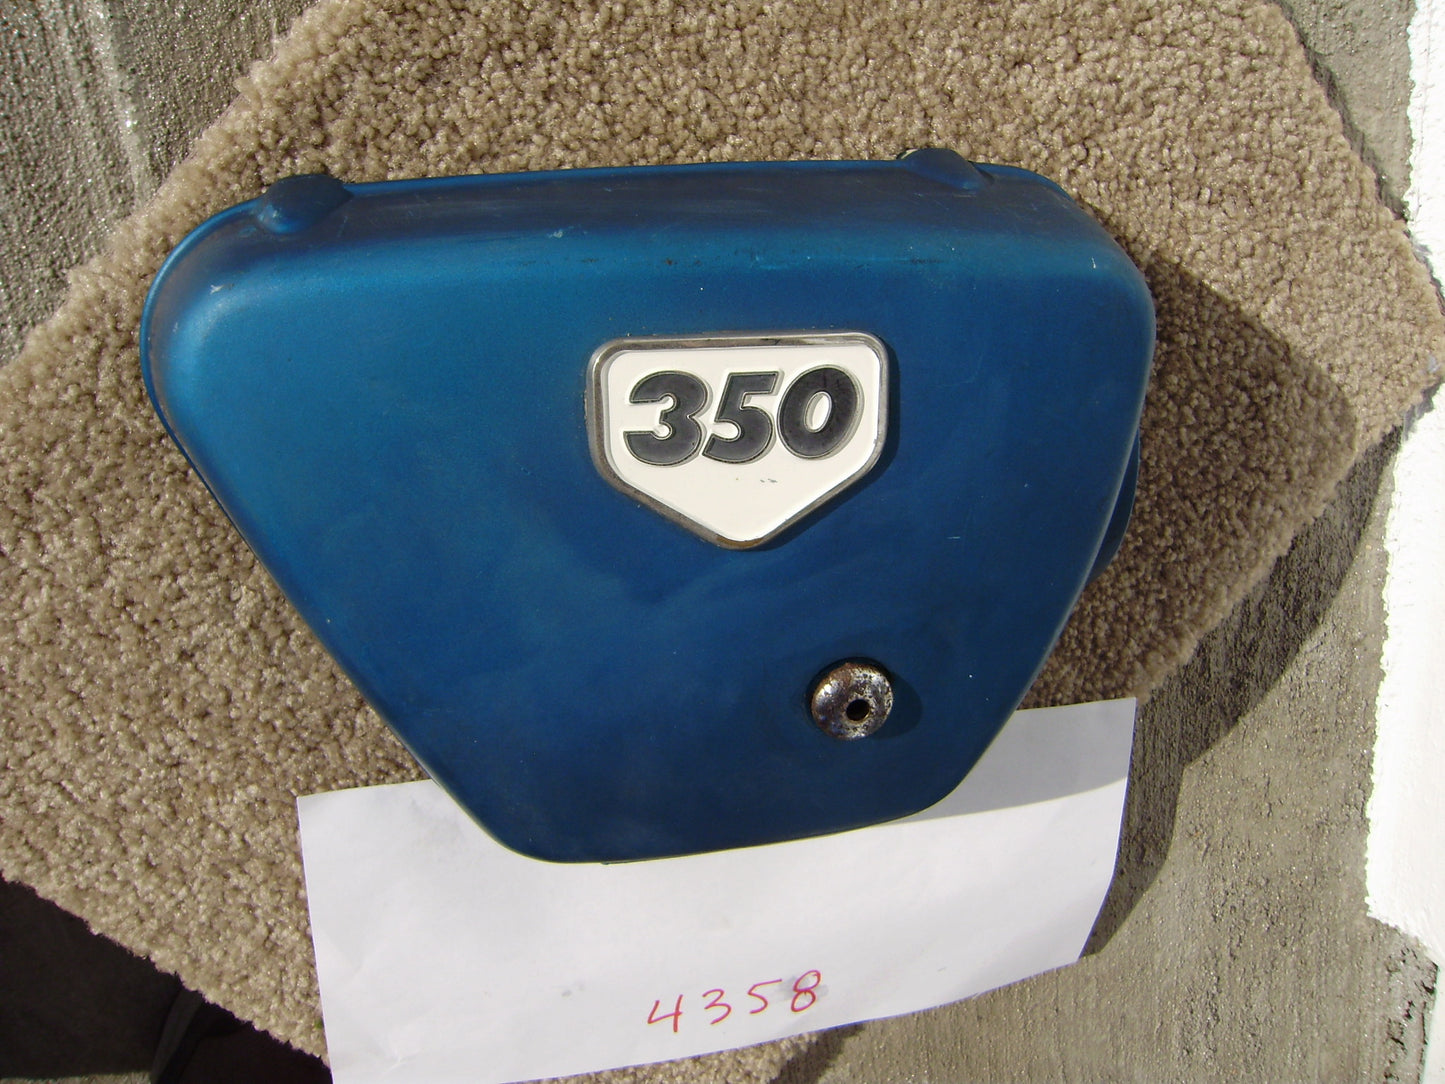 Honda CB350 sidecover right Candy Blue Green with badge sku 4358